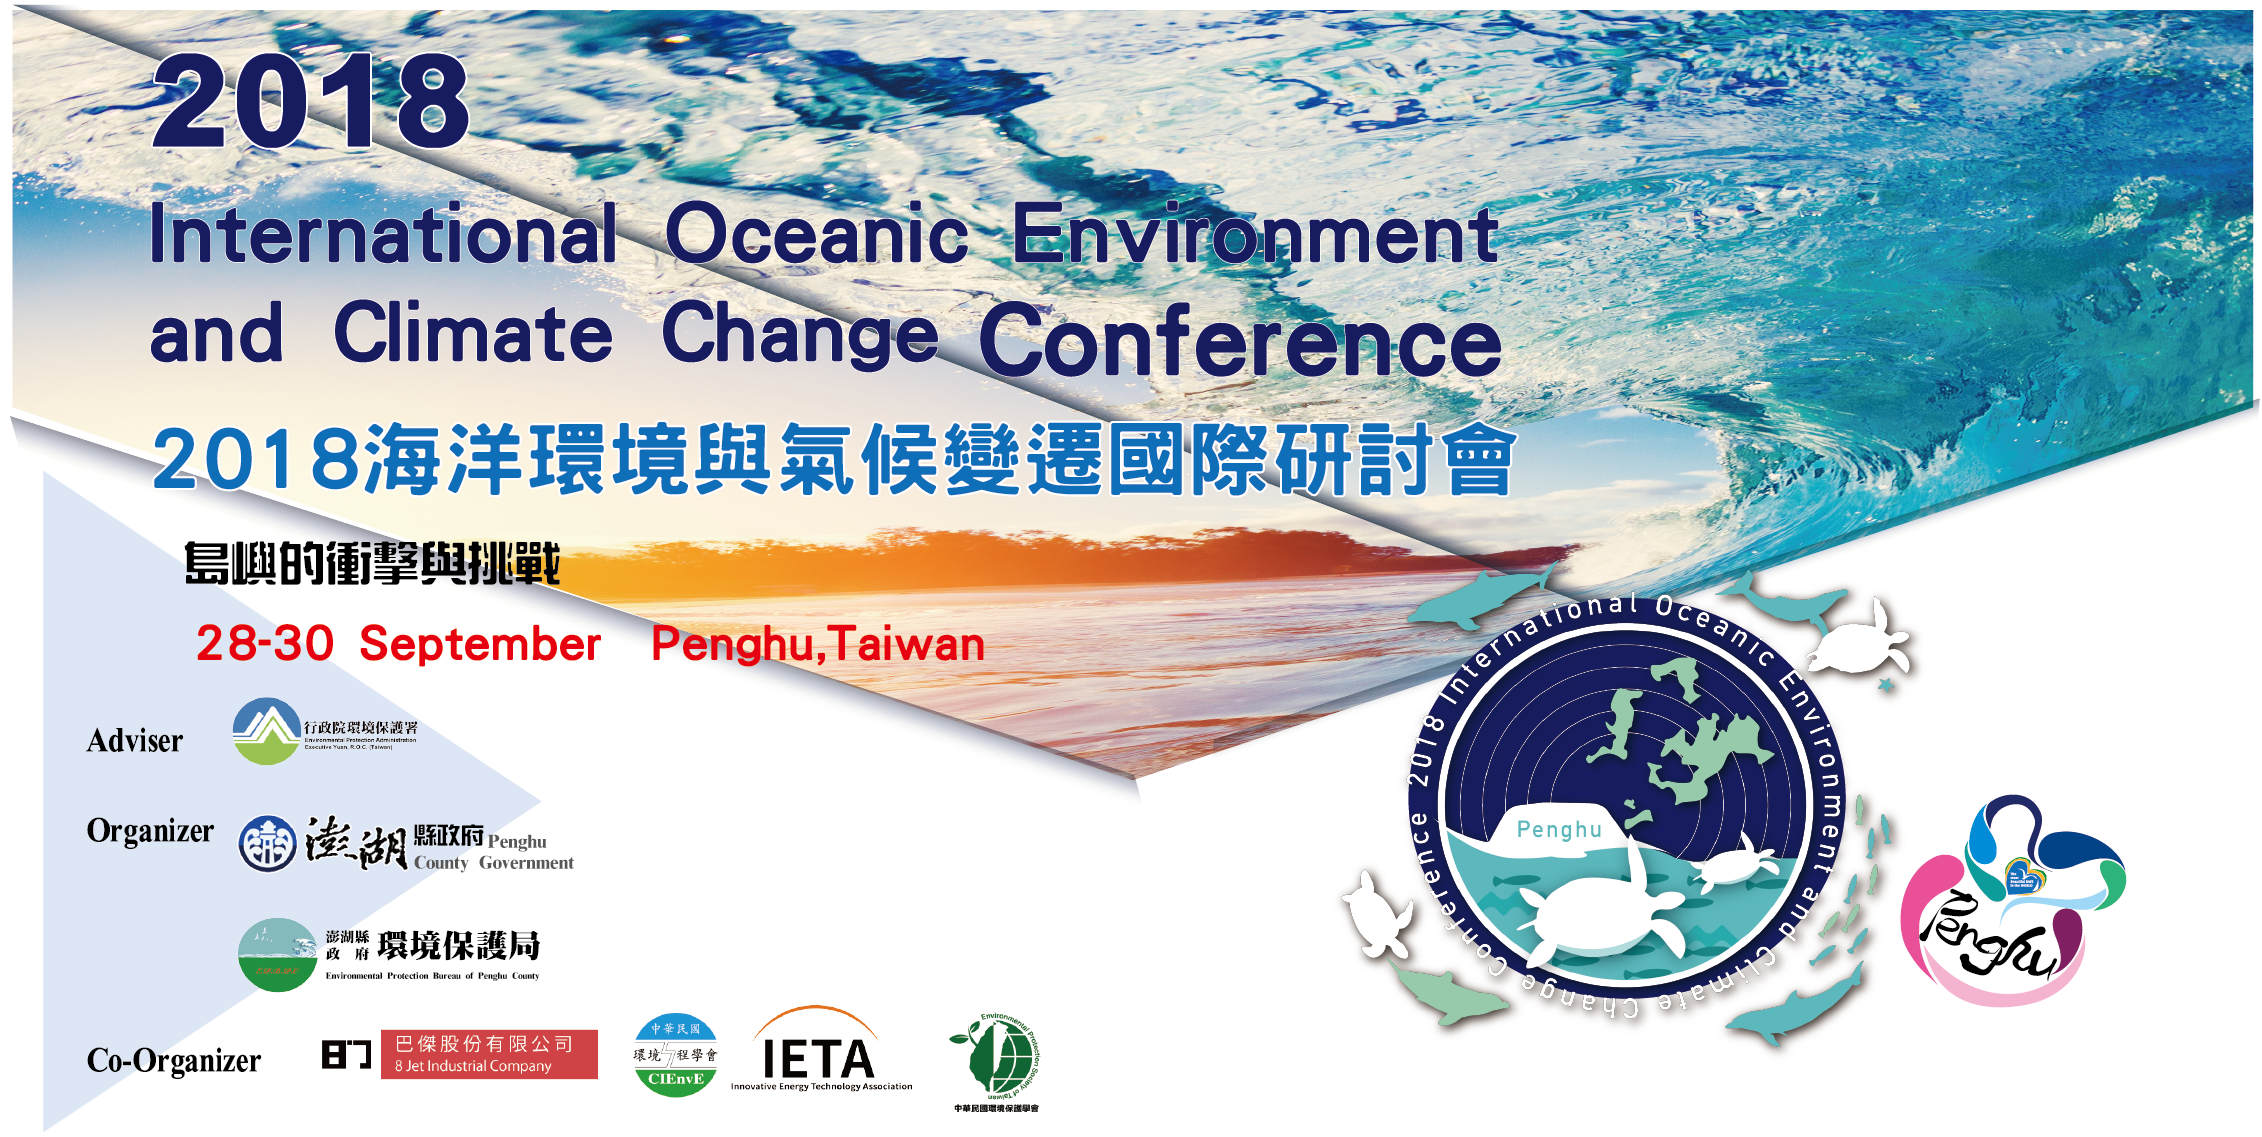 2018 International Oceanic Environment and Climate Change Conference